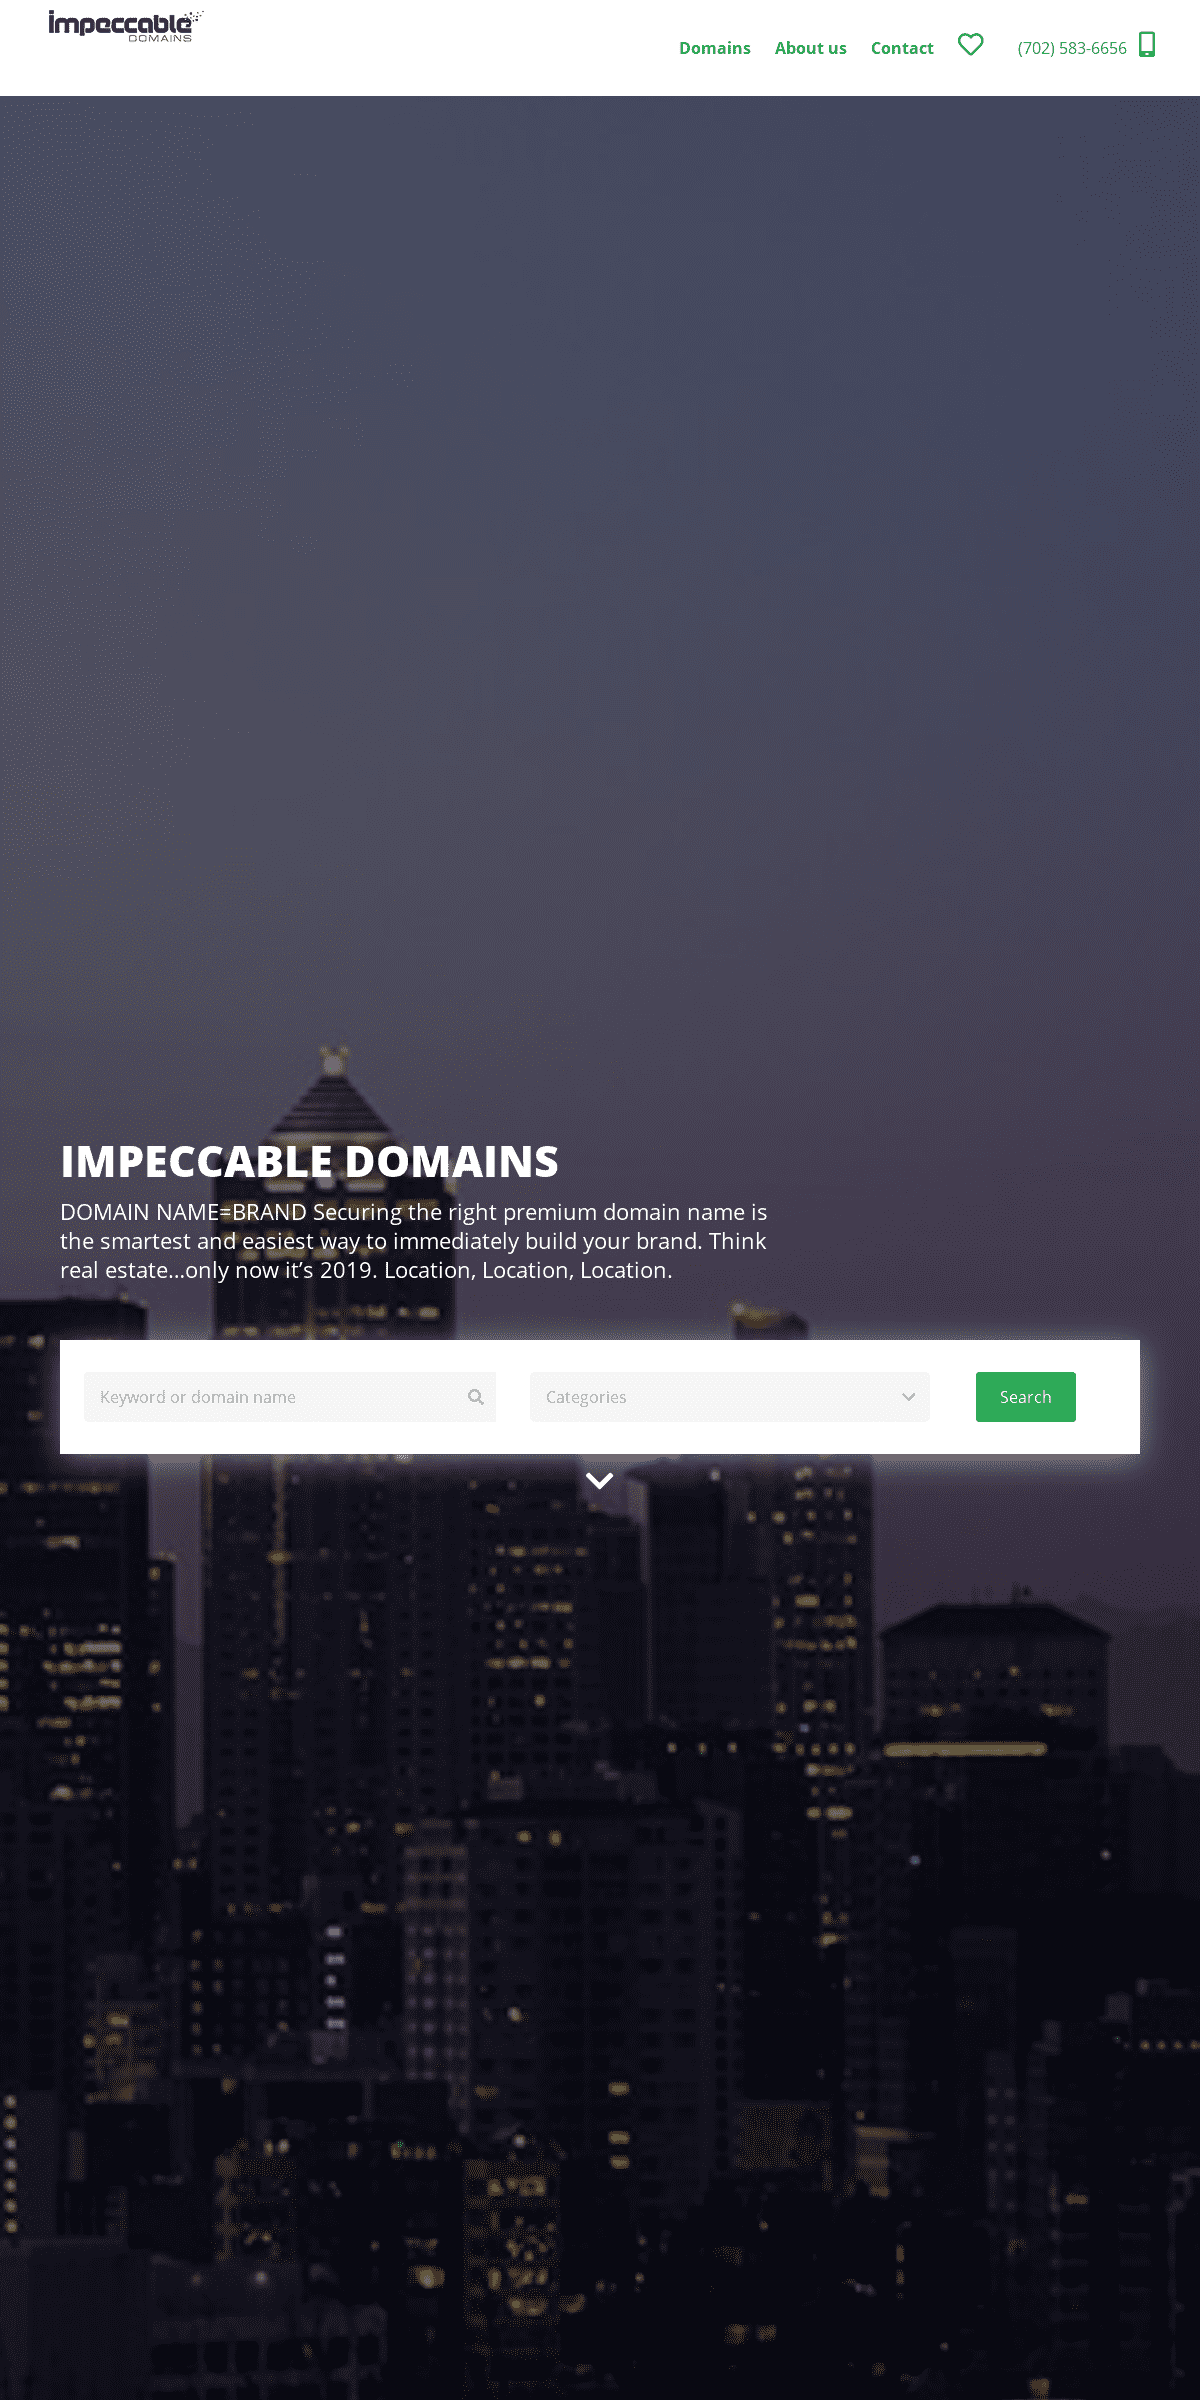 A complete backup of impeccabledomains.com